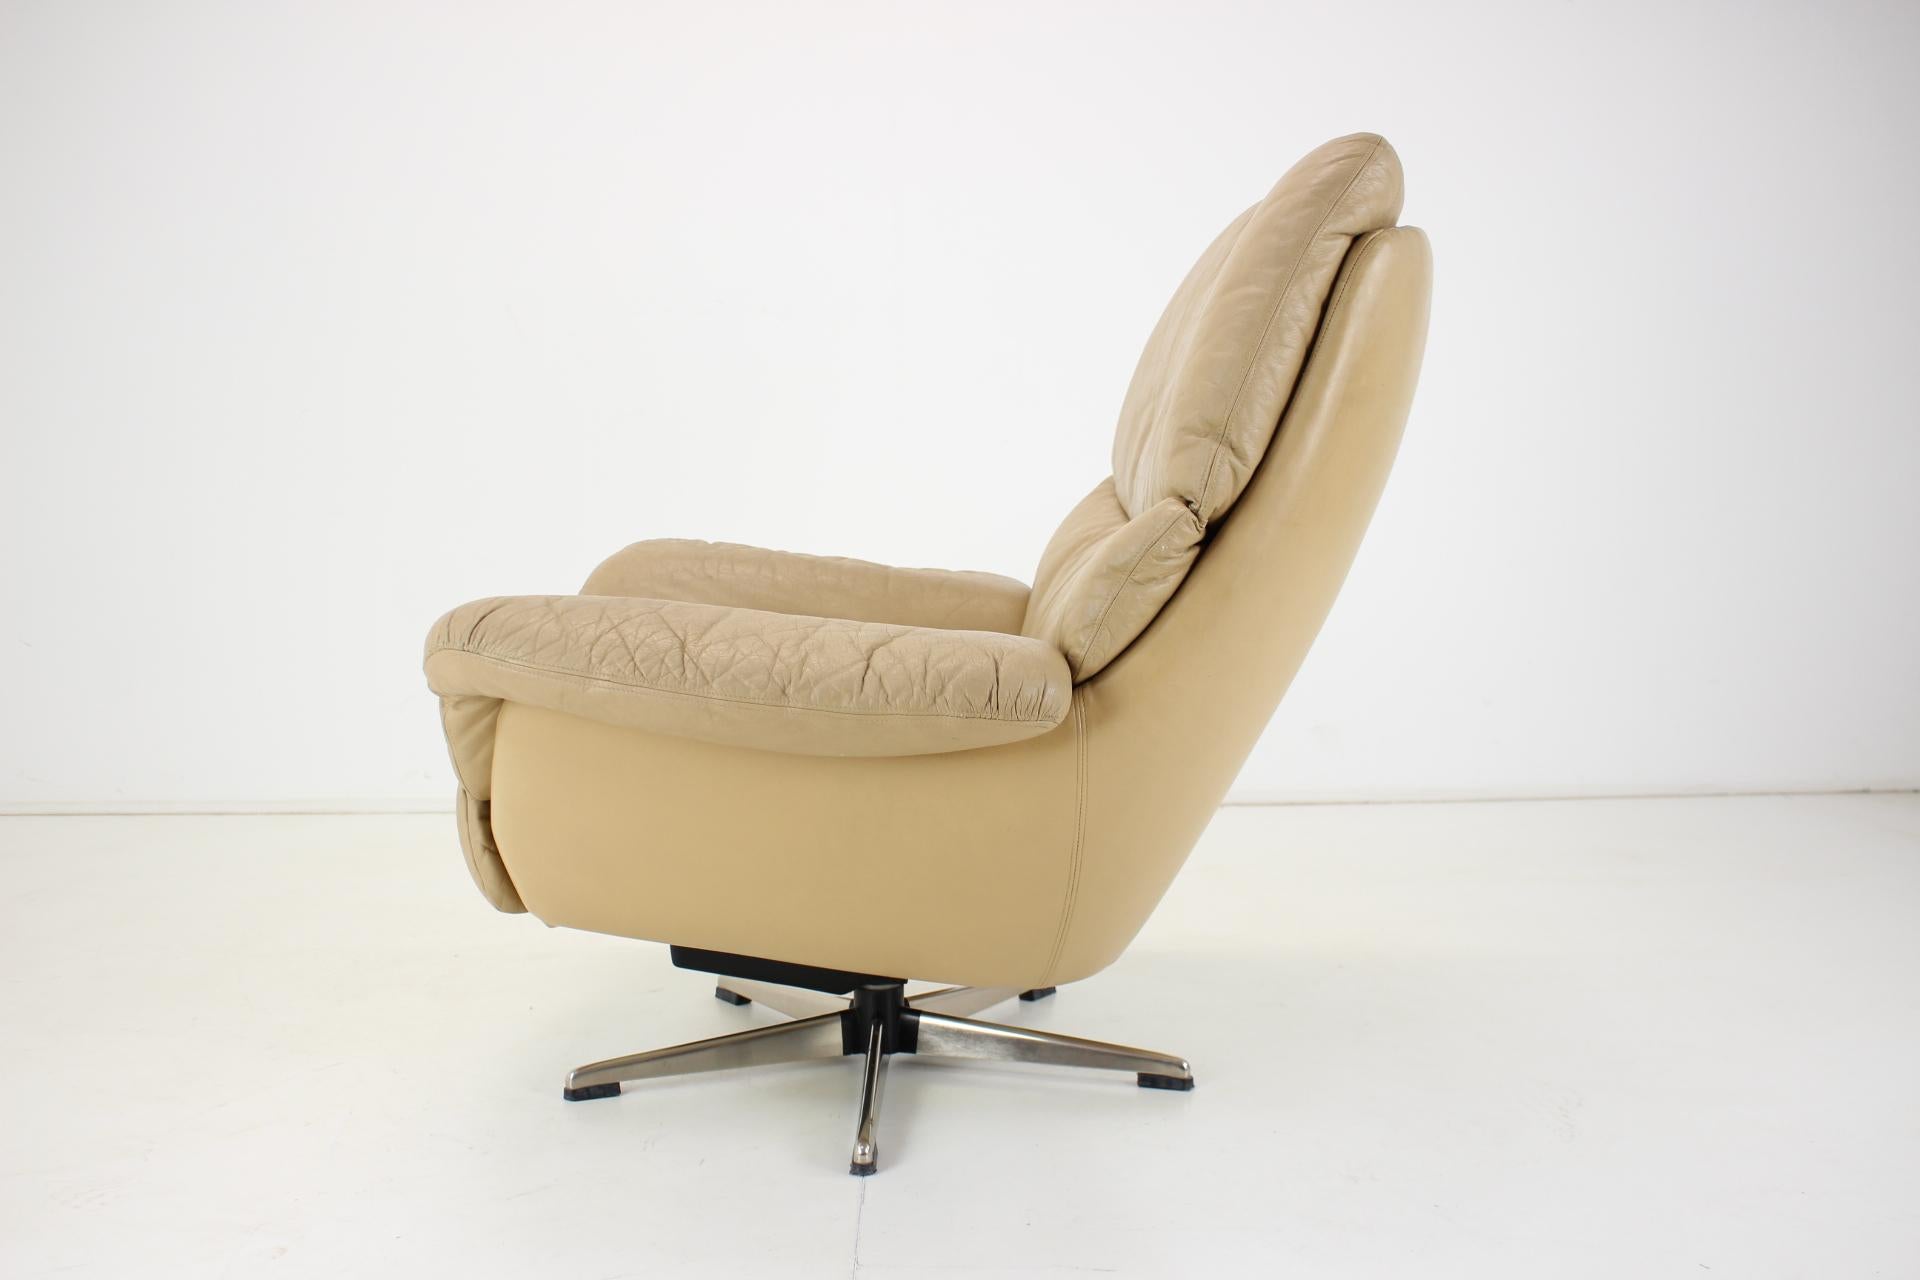 Large Scandinavian Adjustable Leather Armchair by Peem, 1970s, Finland For Sale 1